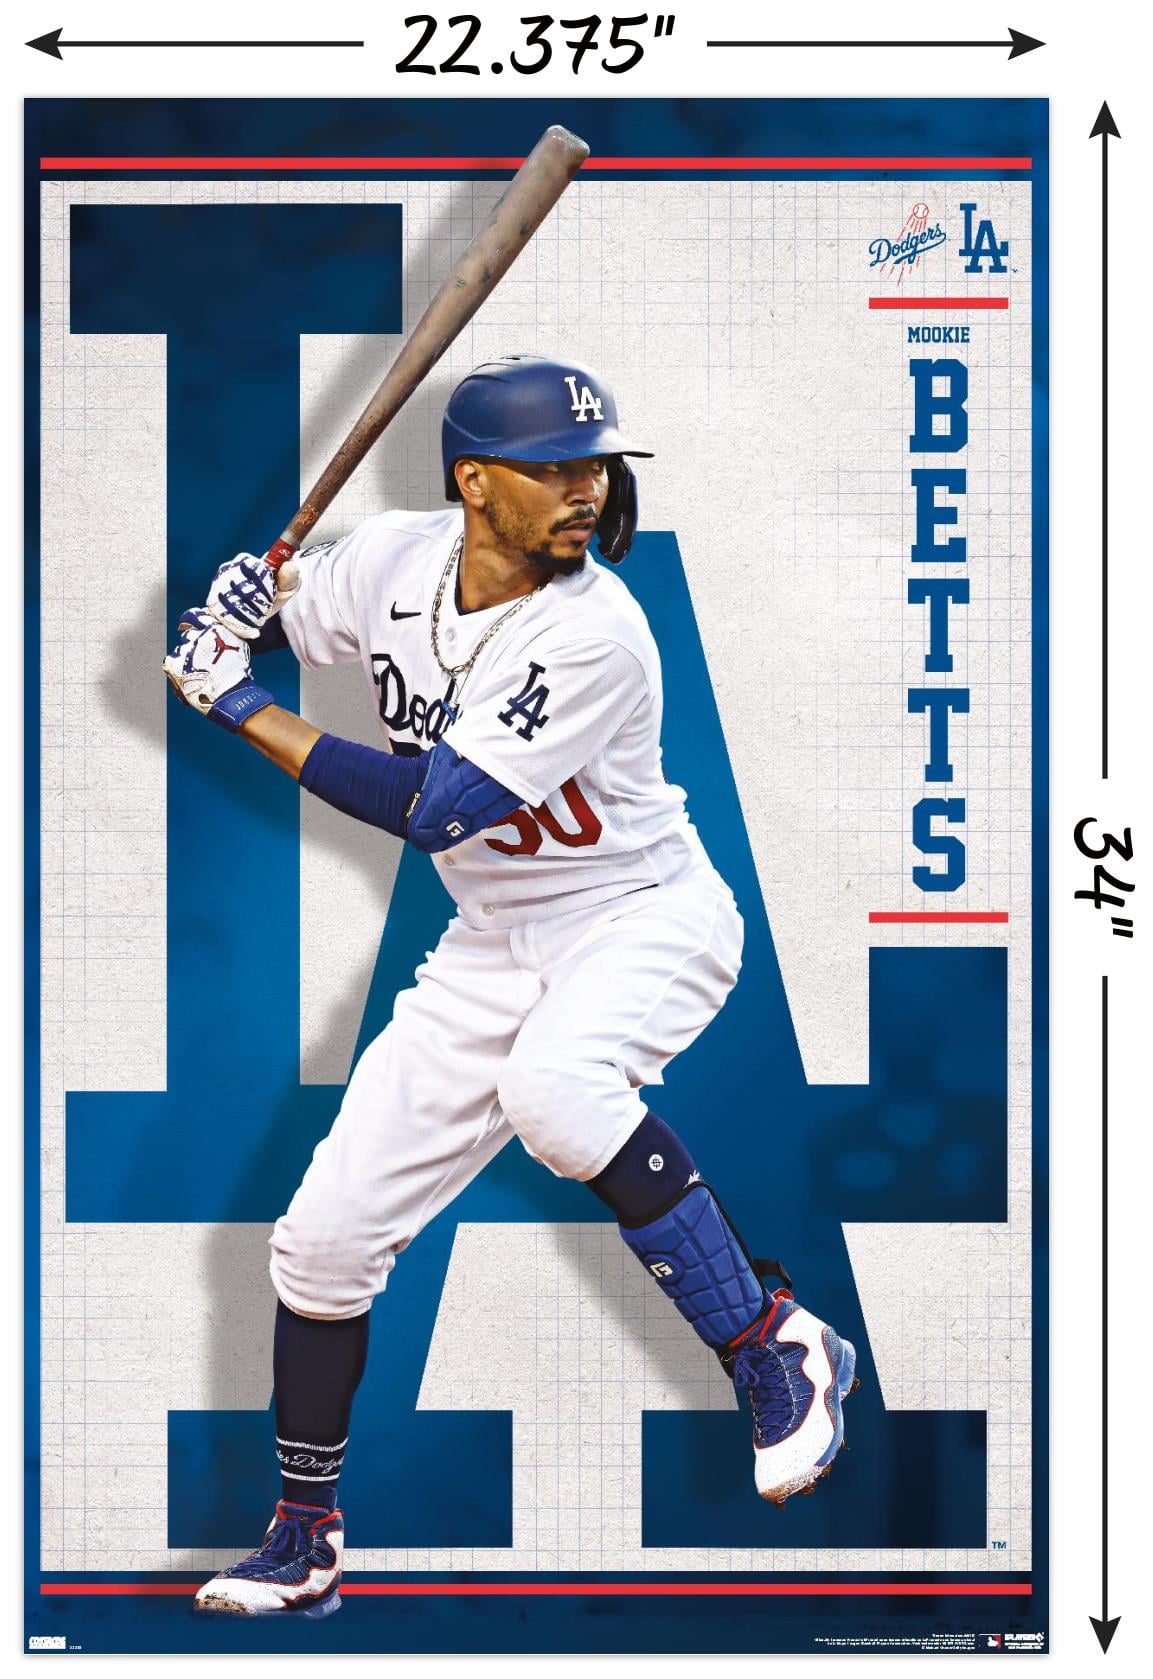  Mookie Betts Los Angeles Dodgers Poster Print, Real Player,  Baseball Player, Mookie Betts Decor, Canvas Art, ArtWork, Posters for Wall  SIZE 24''x32'' (61x81 cm): Posters & Prints